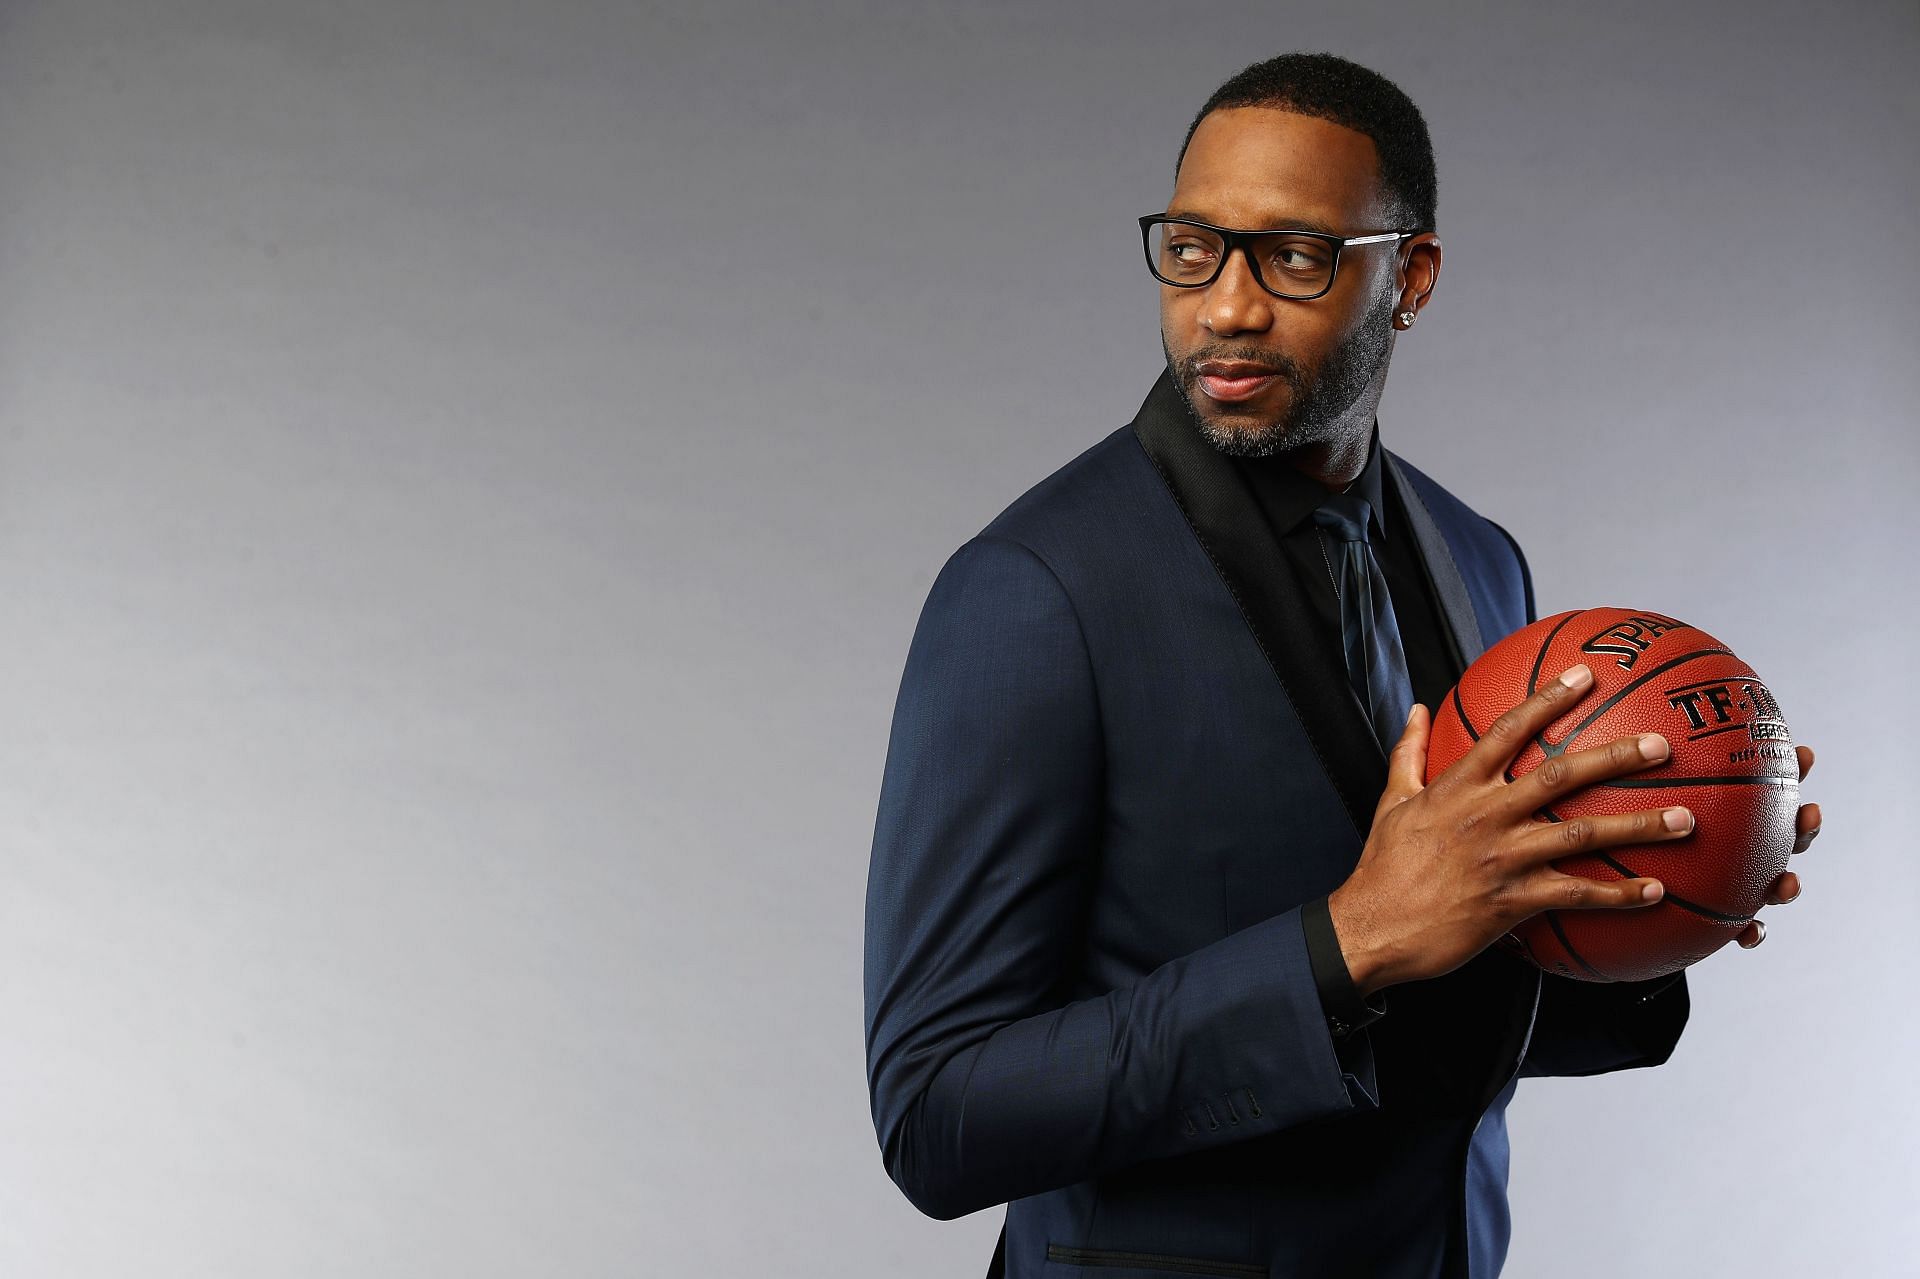 Tracy McGrady at the 2017 Basketball Hall of Fame Enshrinement Ceremony